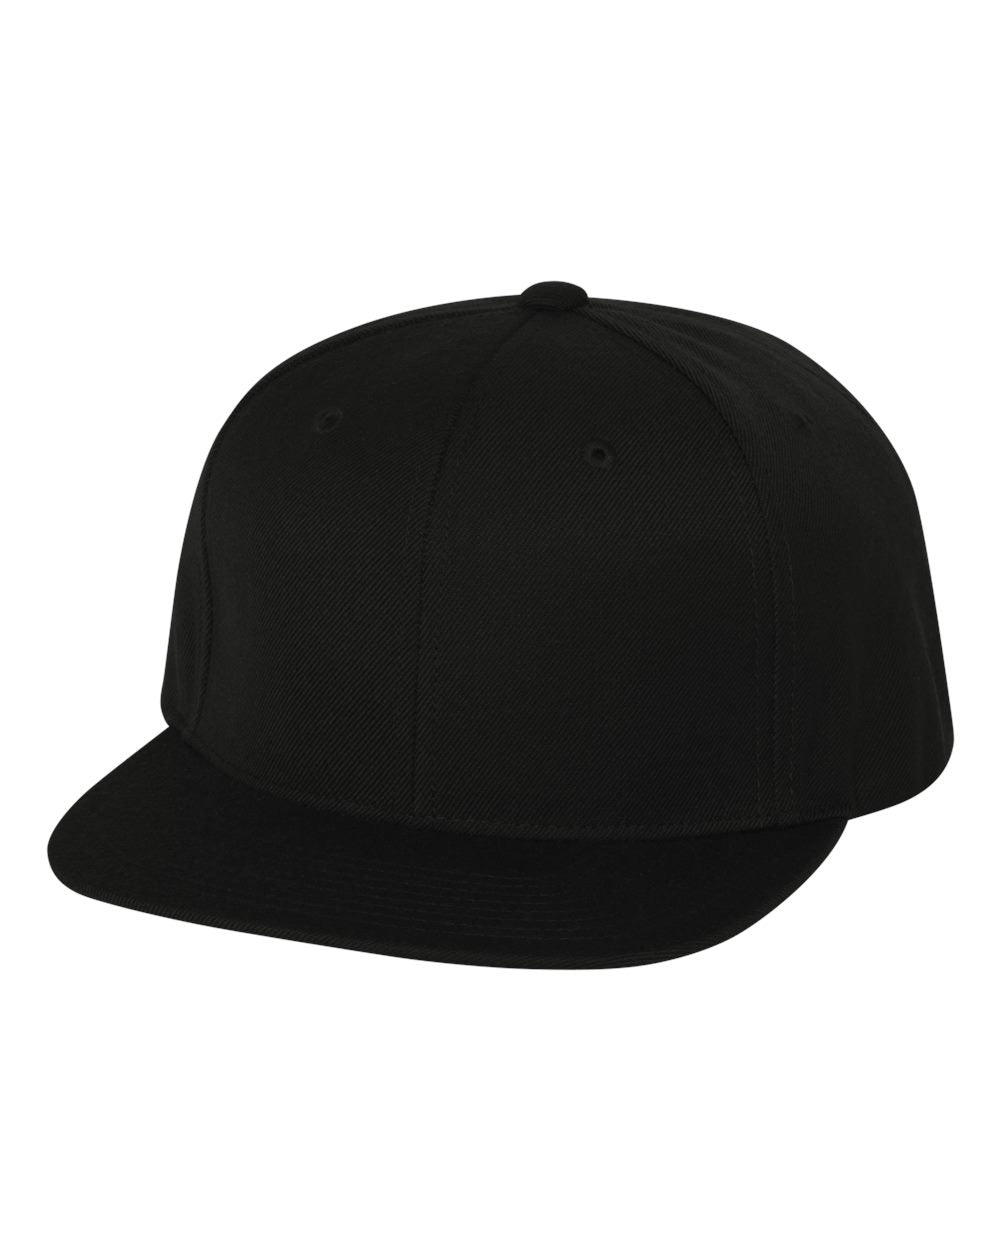 RX2 - 1,000 Snap Back Hat 6089M - 1000 units (Program Pricing Until March 15th)